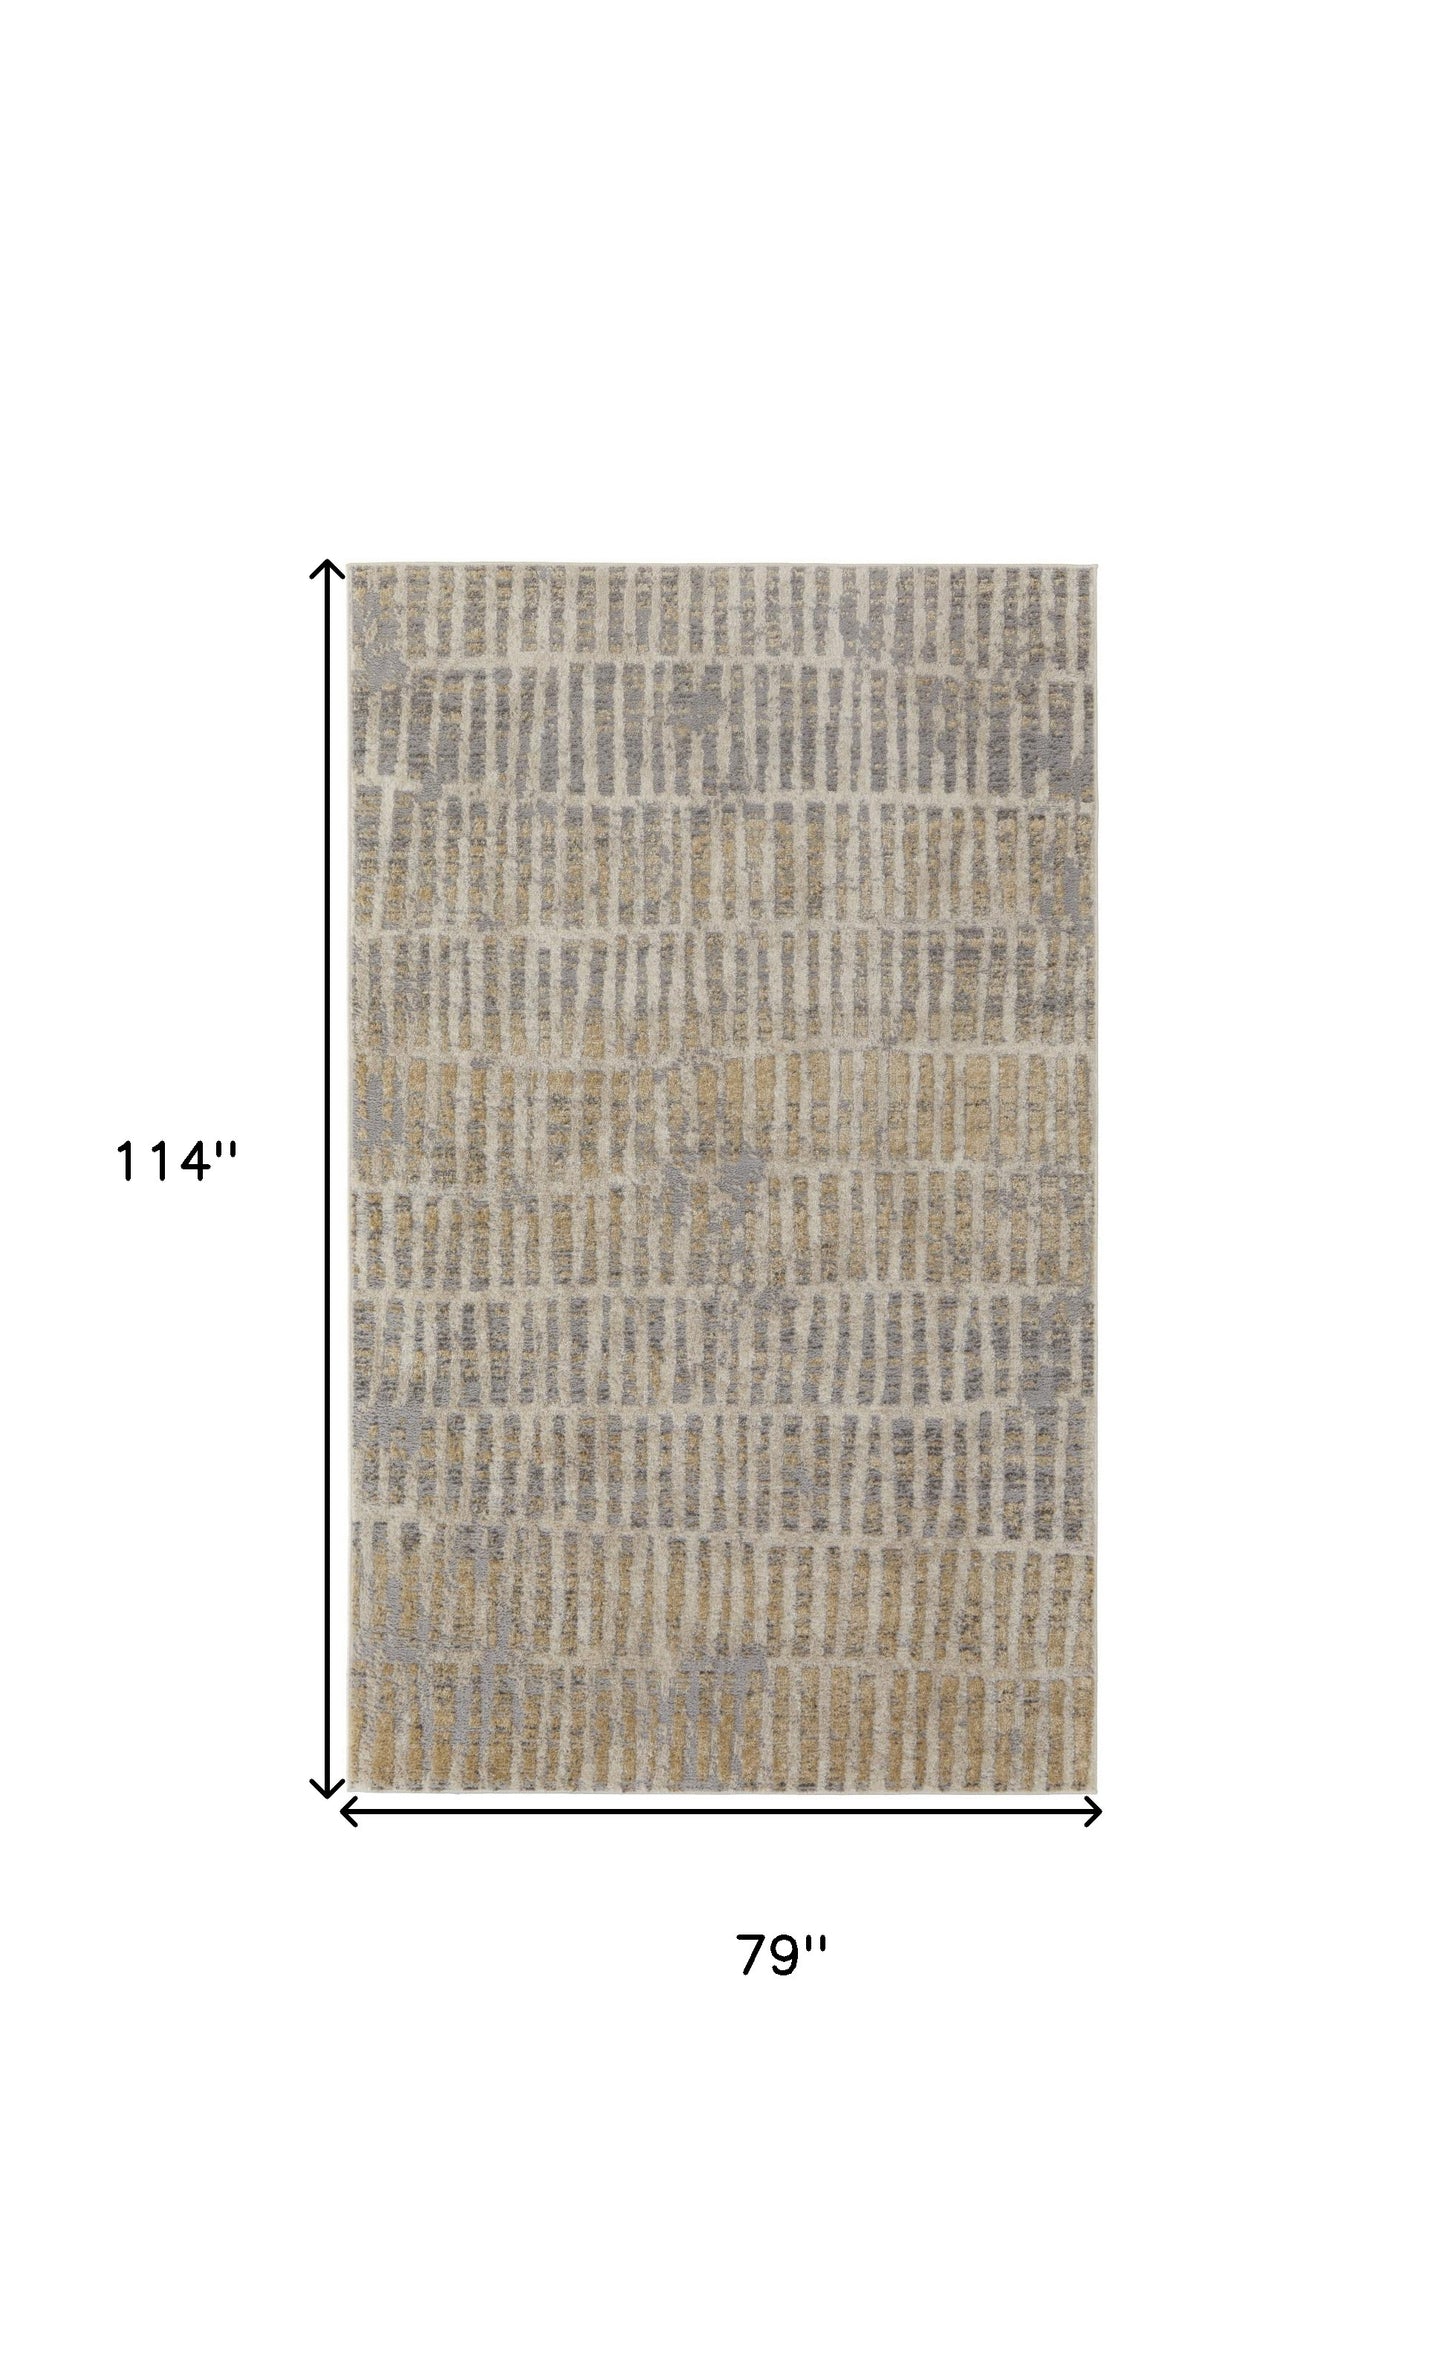 8' X 10' Gray Ivory And Gold Geometric Power Loom Distressed Area Rug